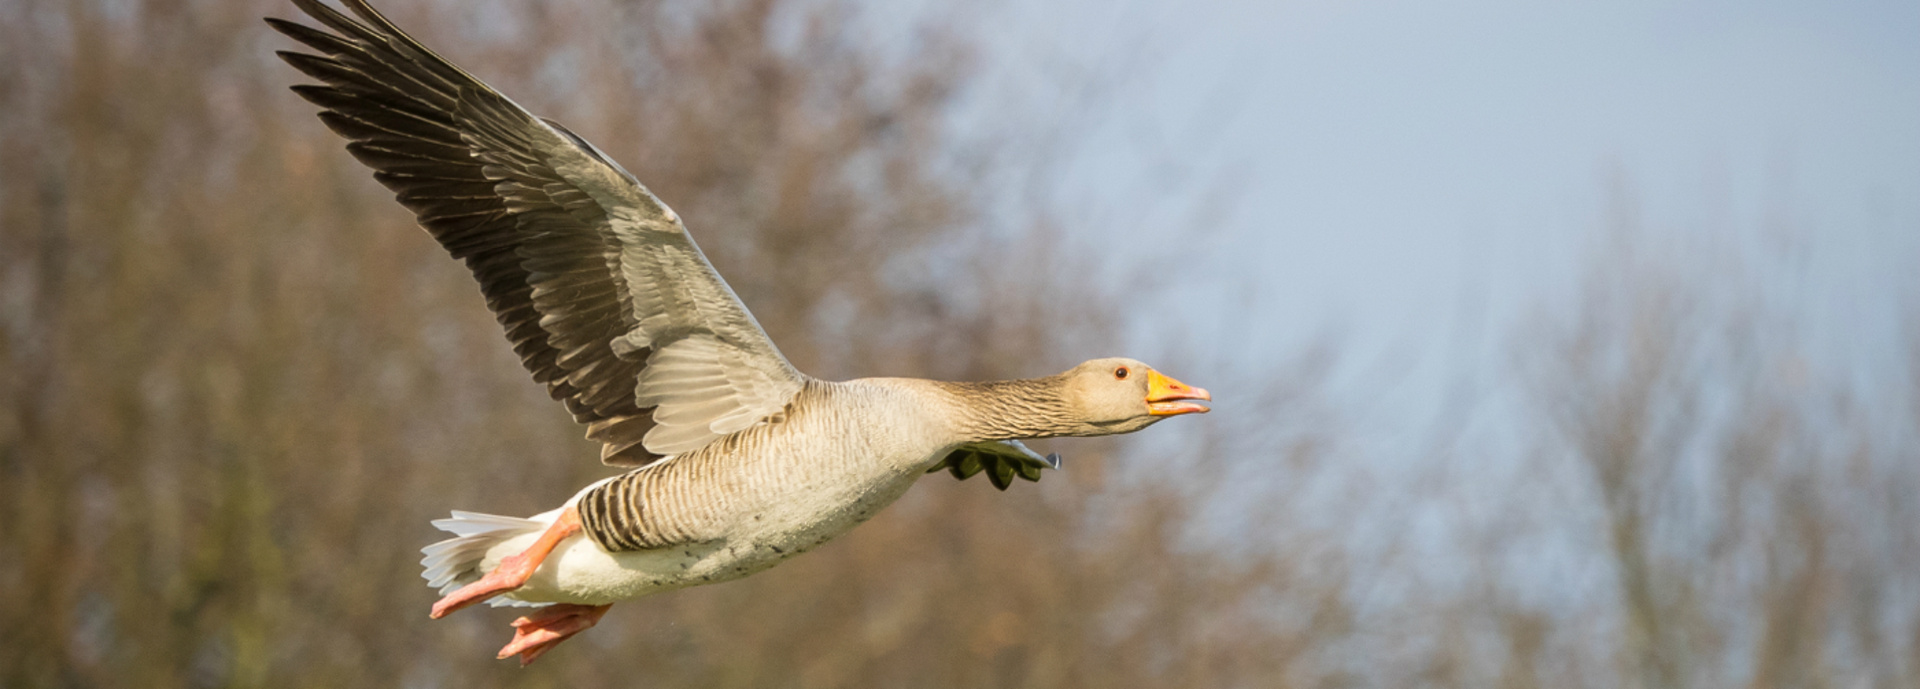 An image of a Pink Footed Goose